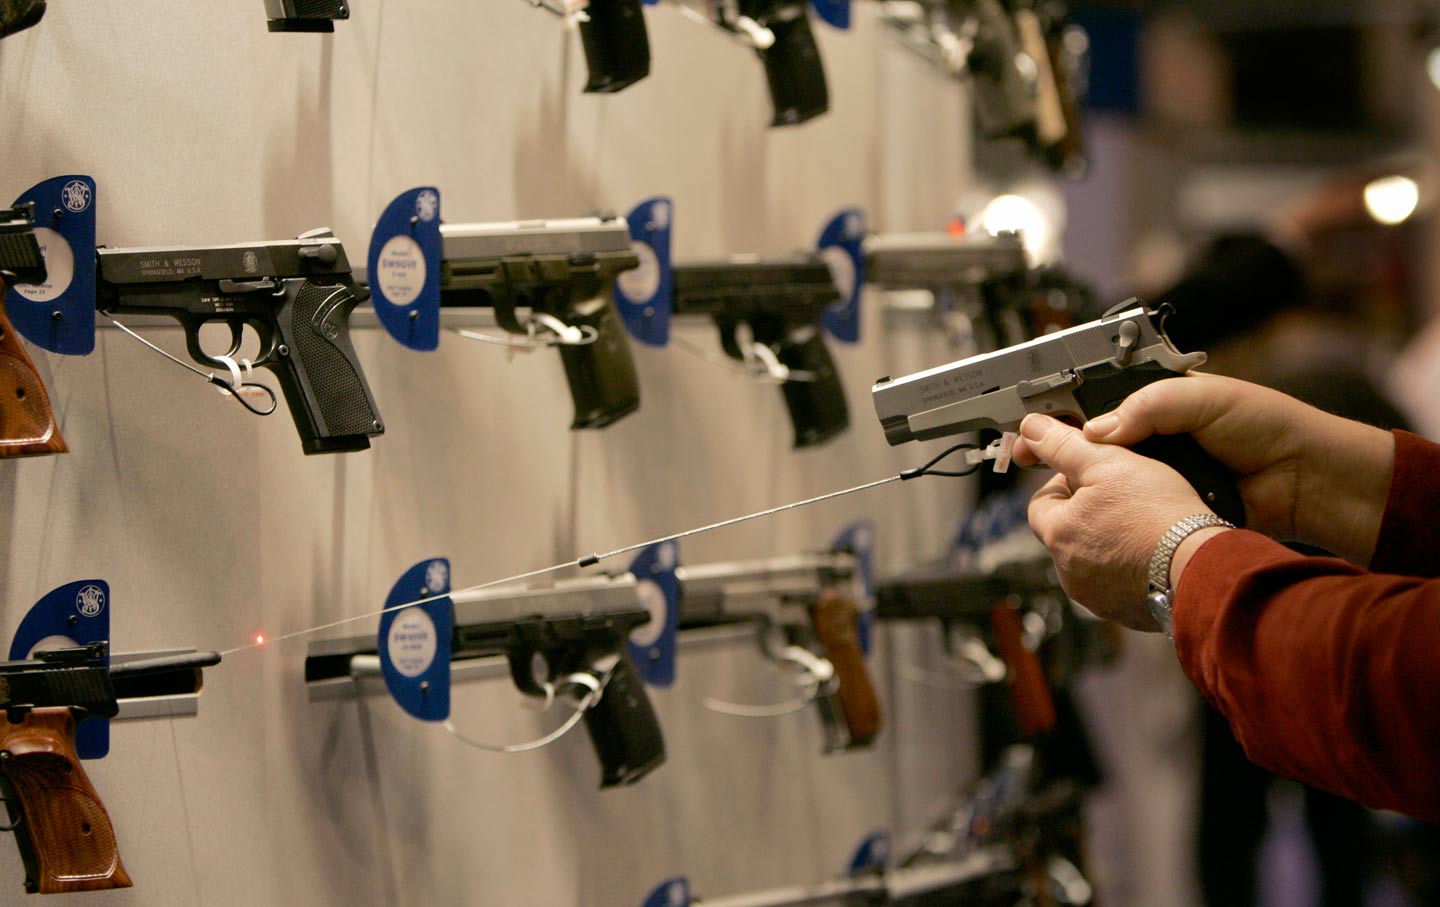 A woman points a handgun with a laser sight on a wall display of other guns during the National Rifle Association convention in St. Louis.